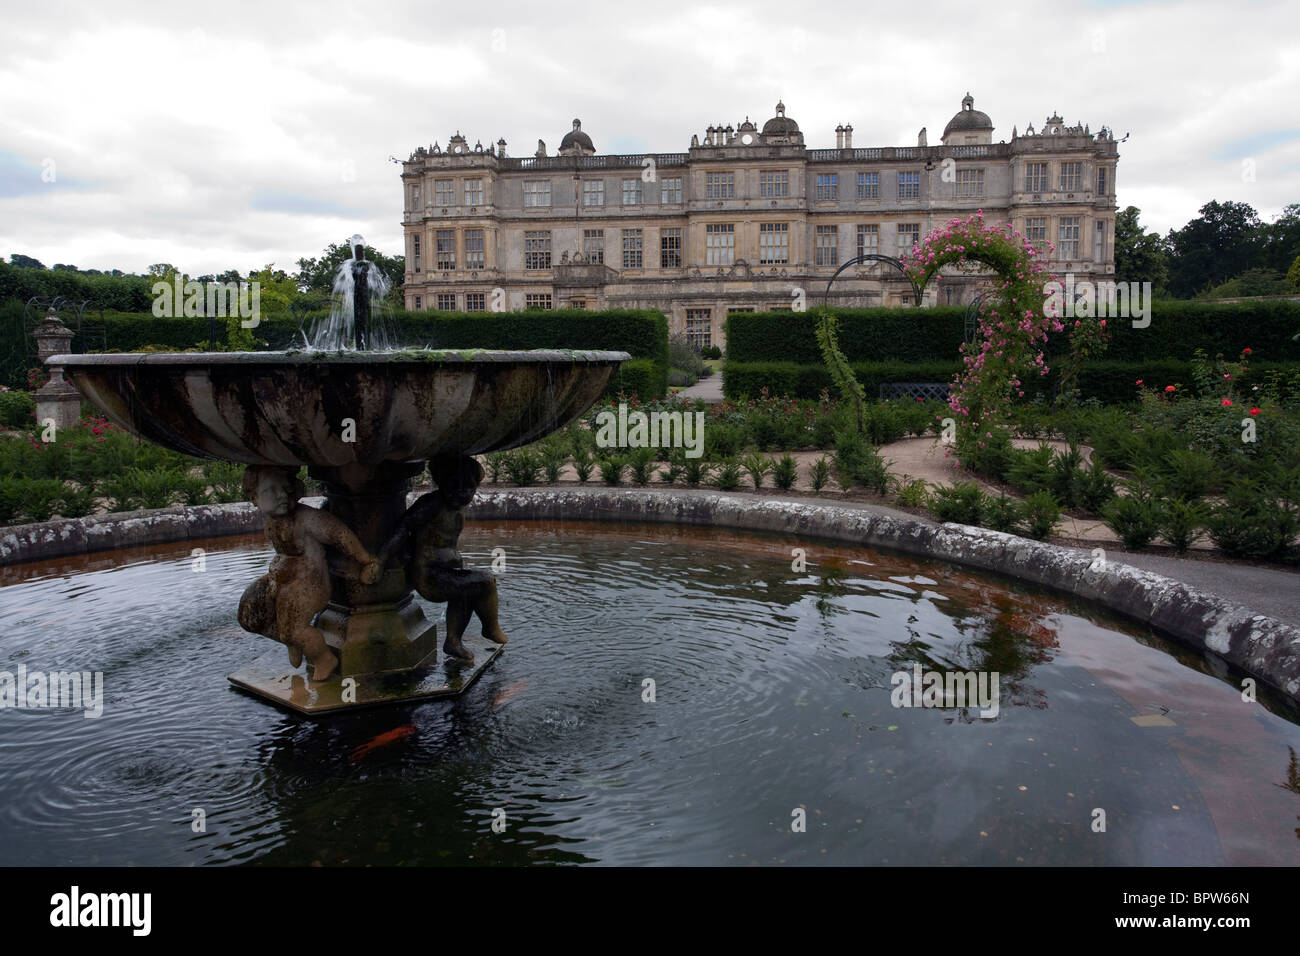 Longleat House showing one of the smaller fountains in the gardens at the side of the house Stock Photo